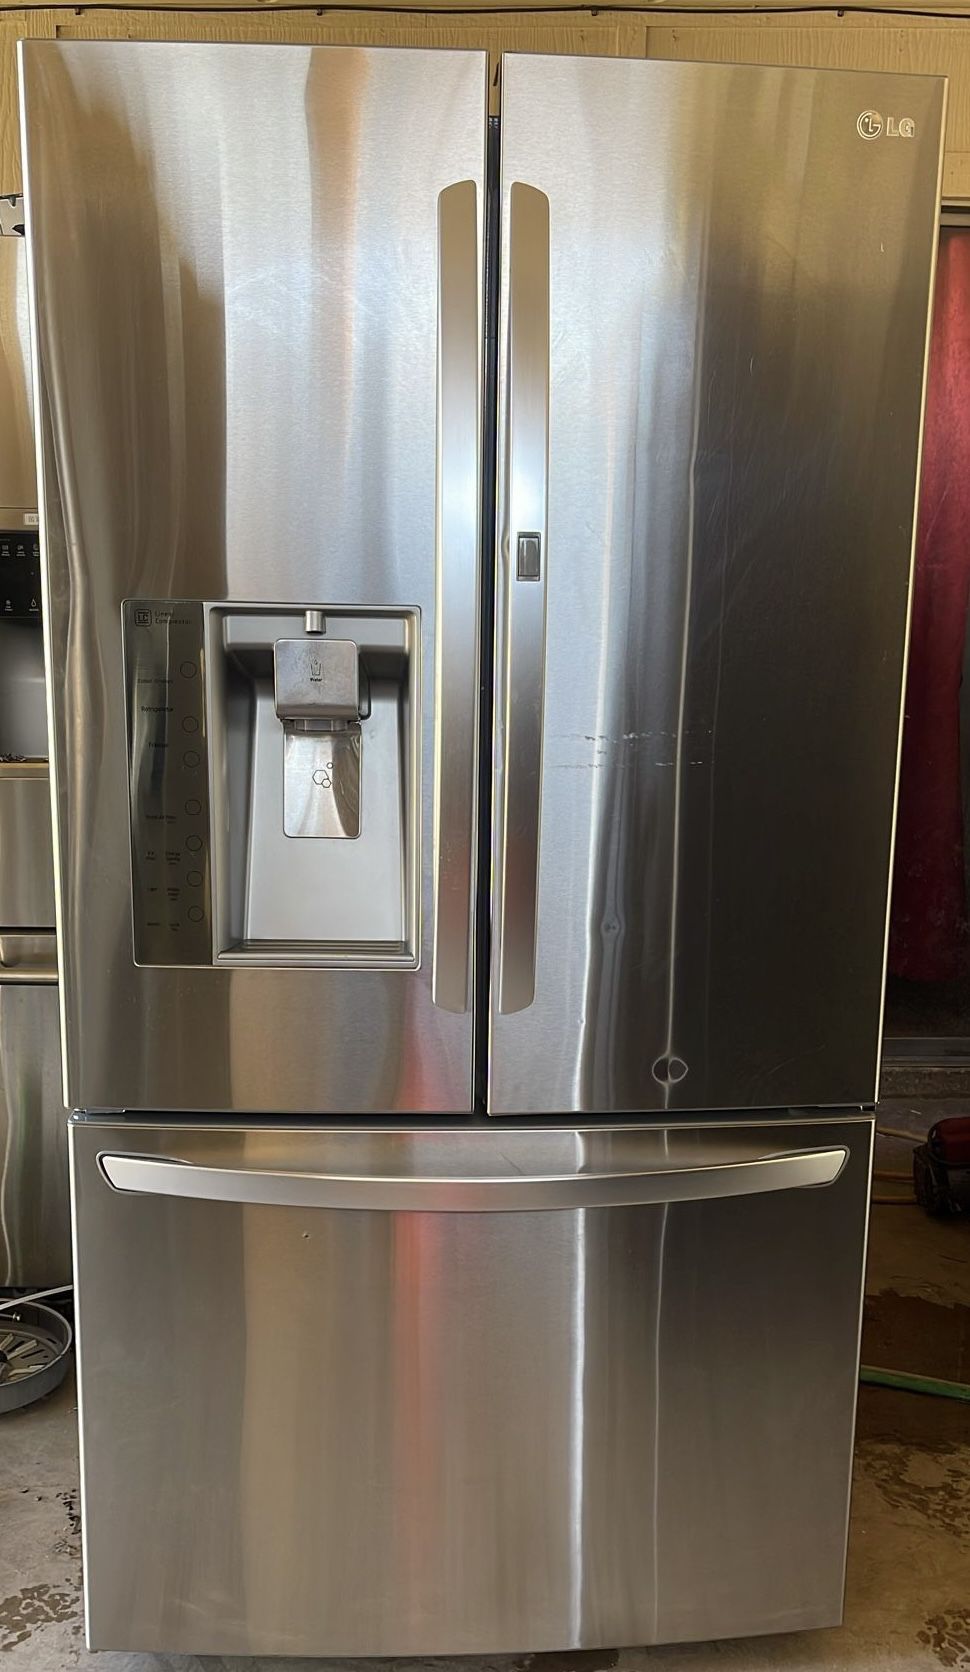 Refrigerator Two Months Warranty Delivery 